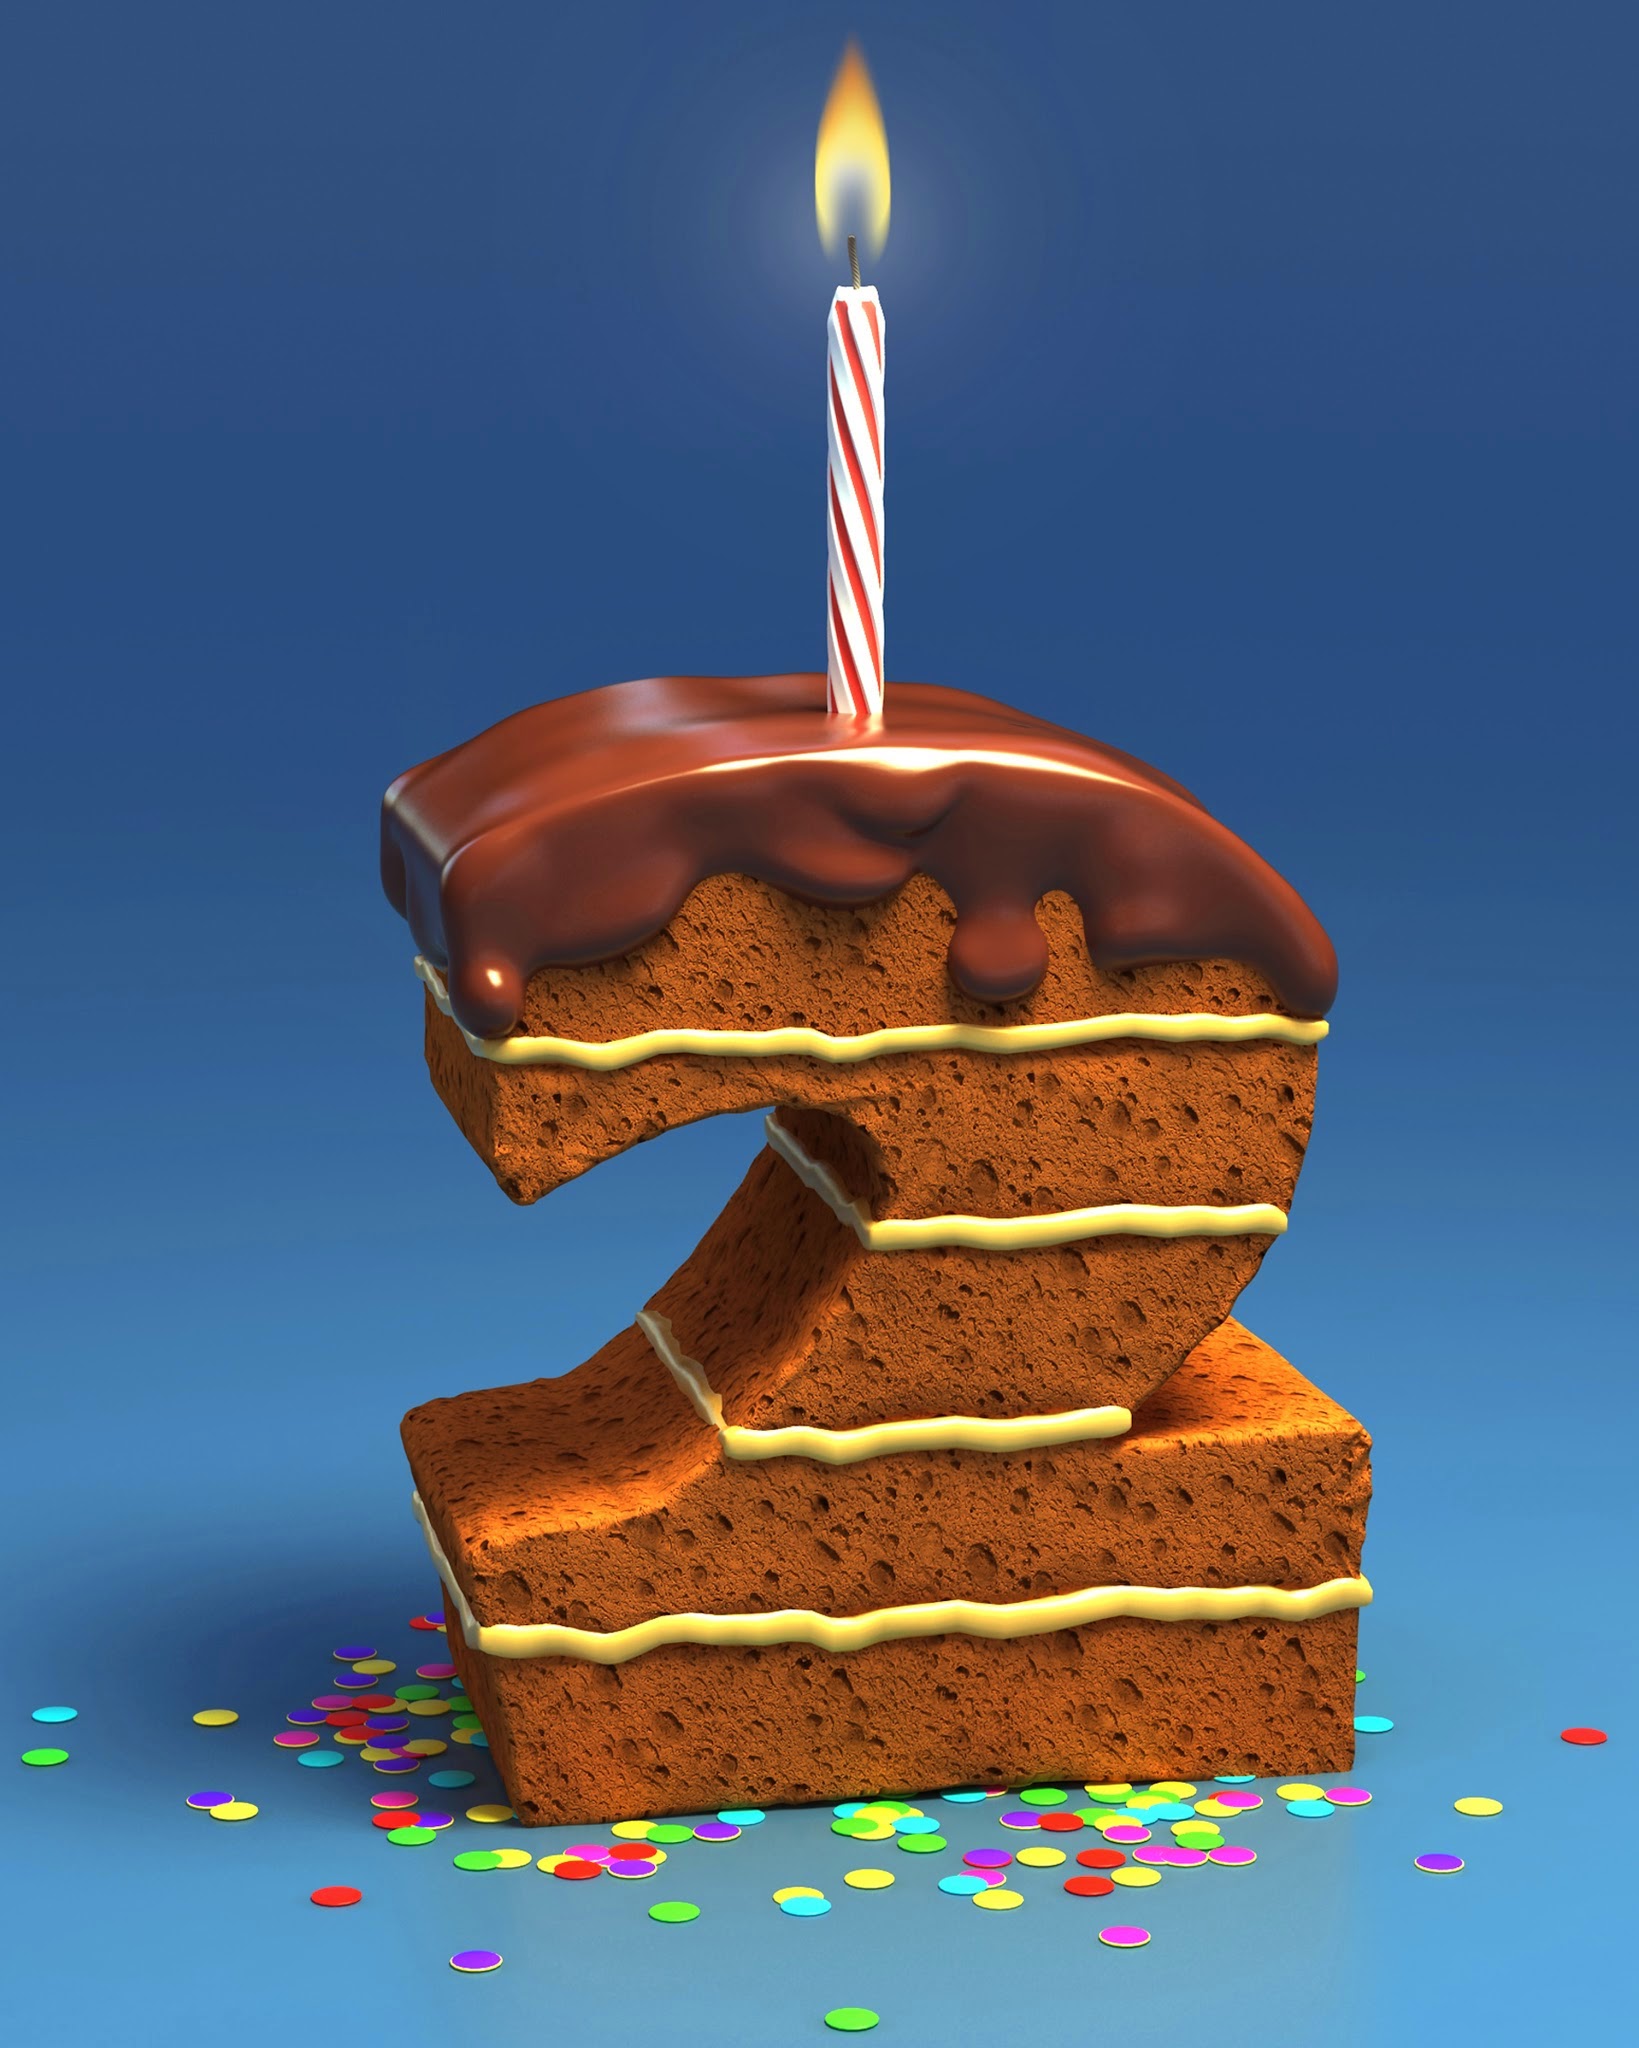 We are already 2 years old!